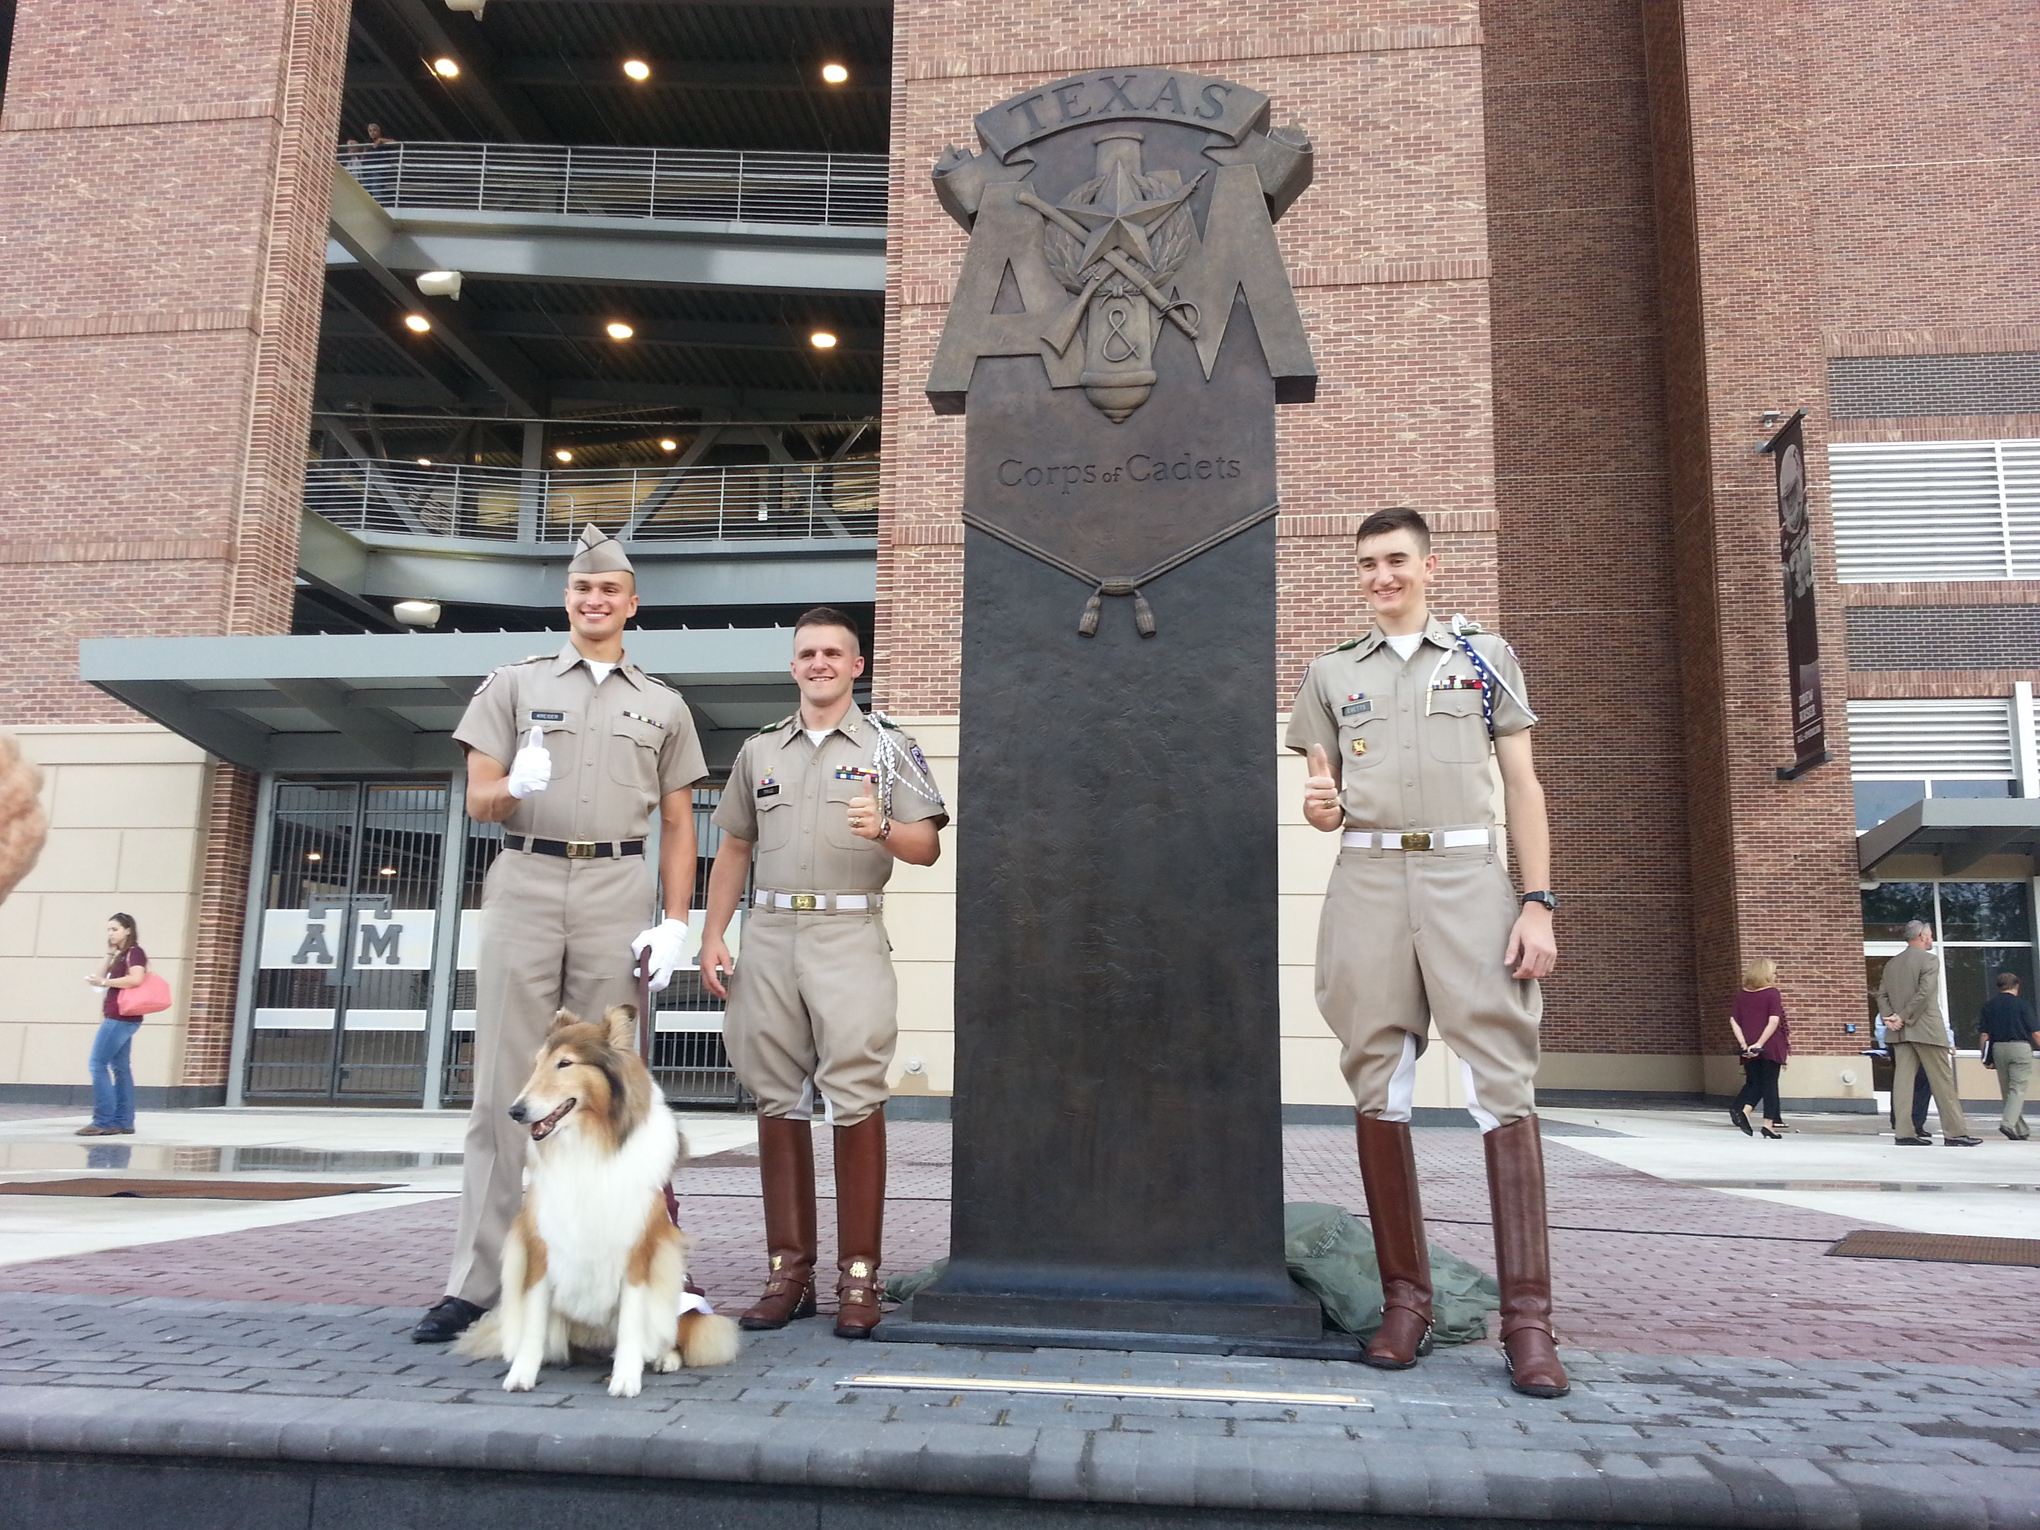 New Statues revealed outside of Kyle Field, pictured is the least frightening of the collection.